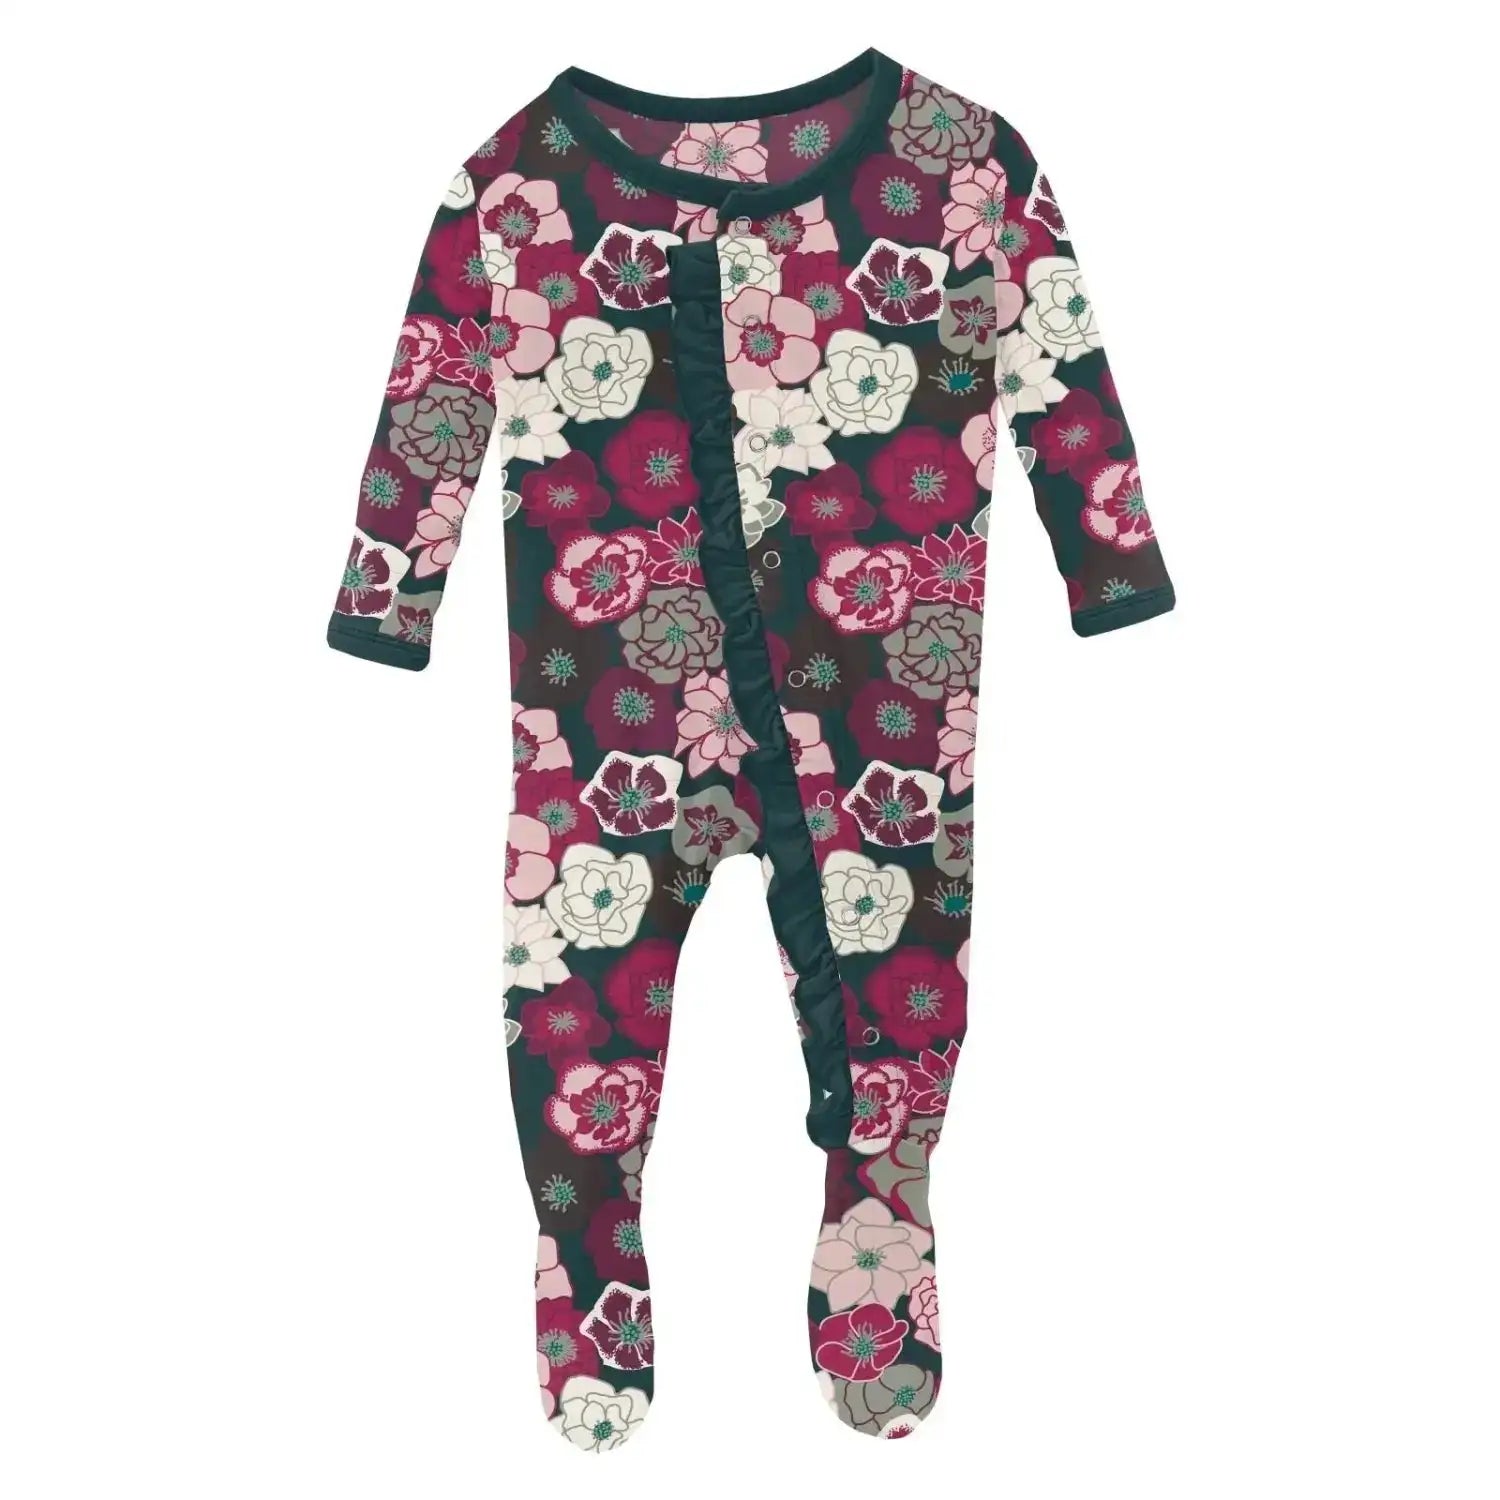 Kickee Pants footie pajamas in magenta, pale pink, white and green flowers. Front view.